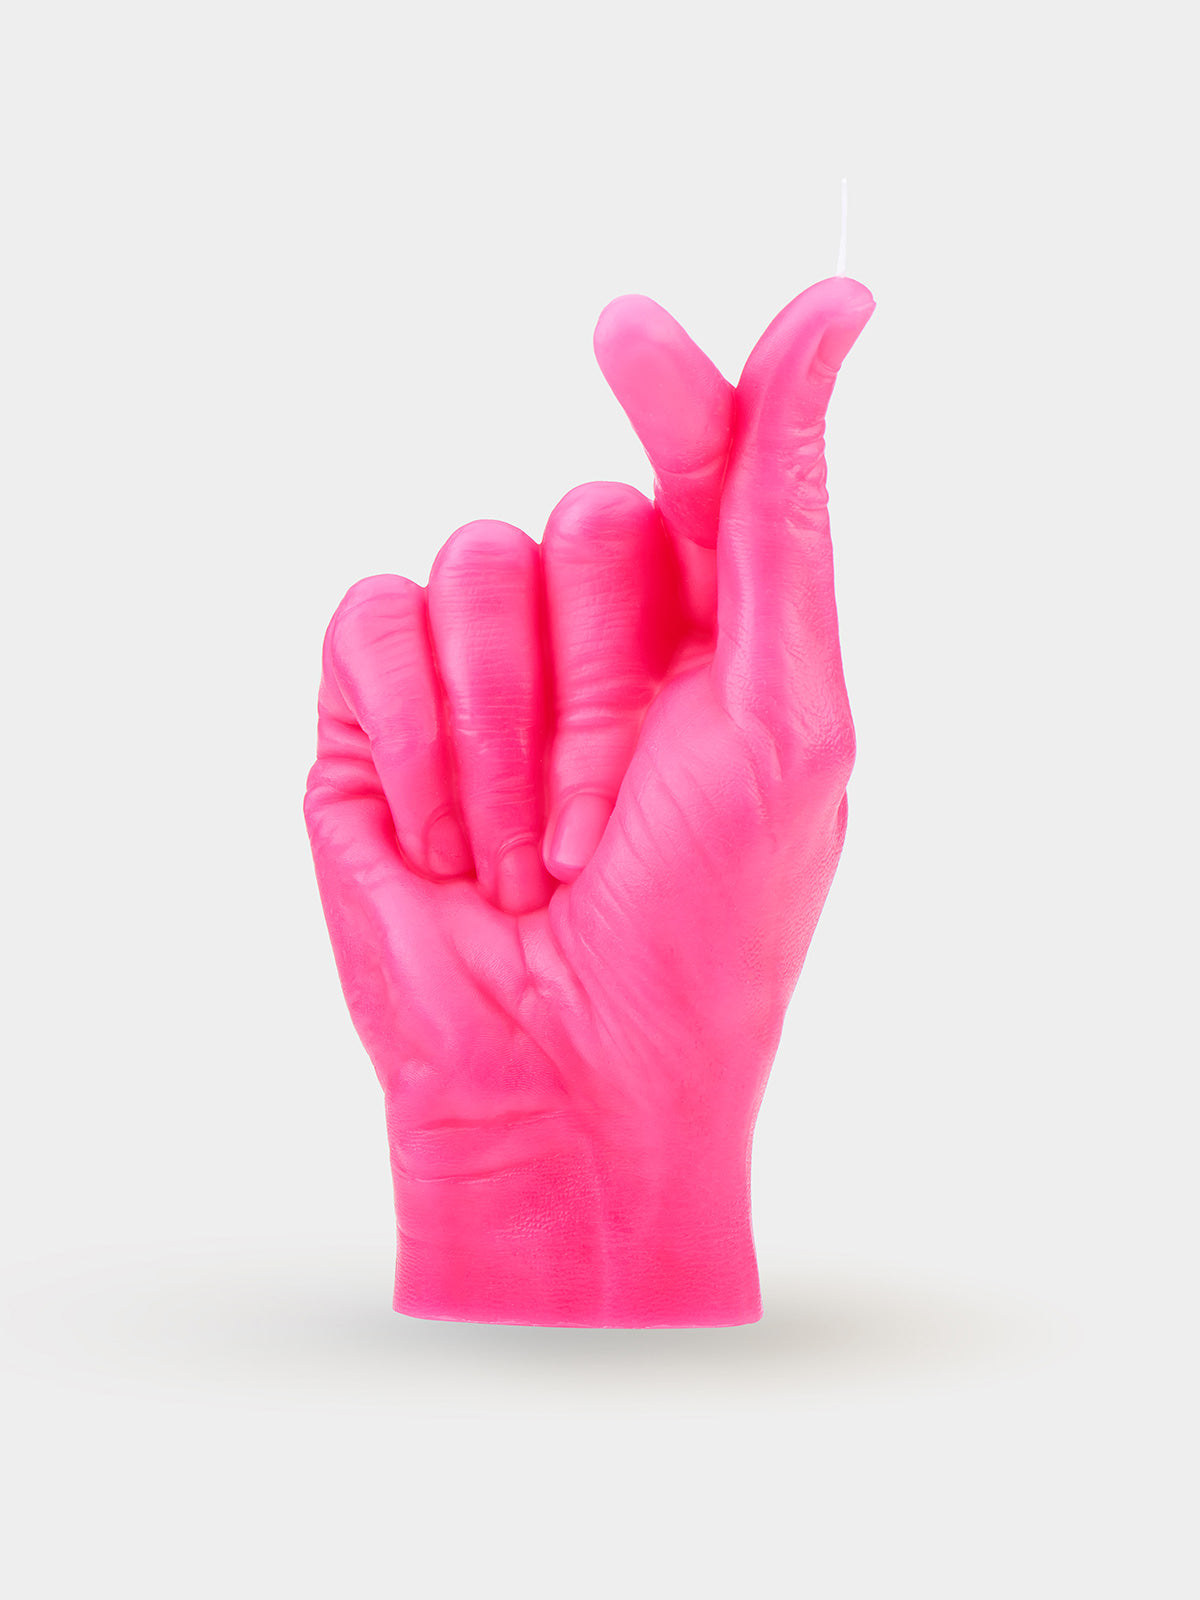 CandleHand "Finger Hearts" Candle - Pink